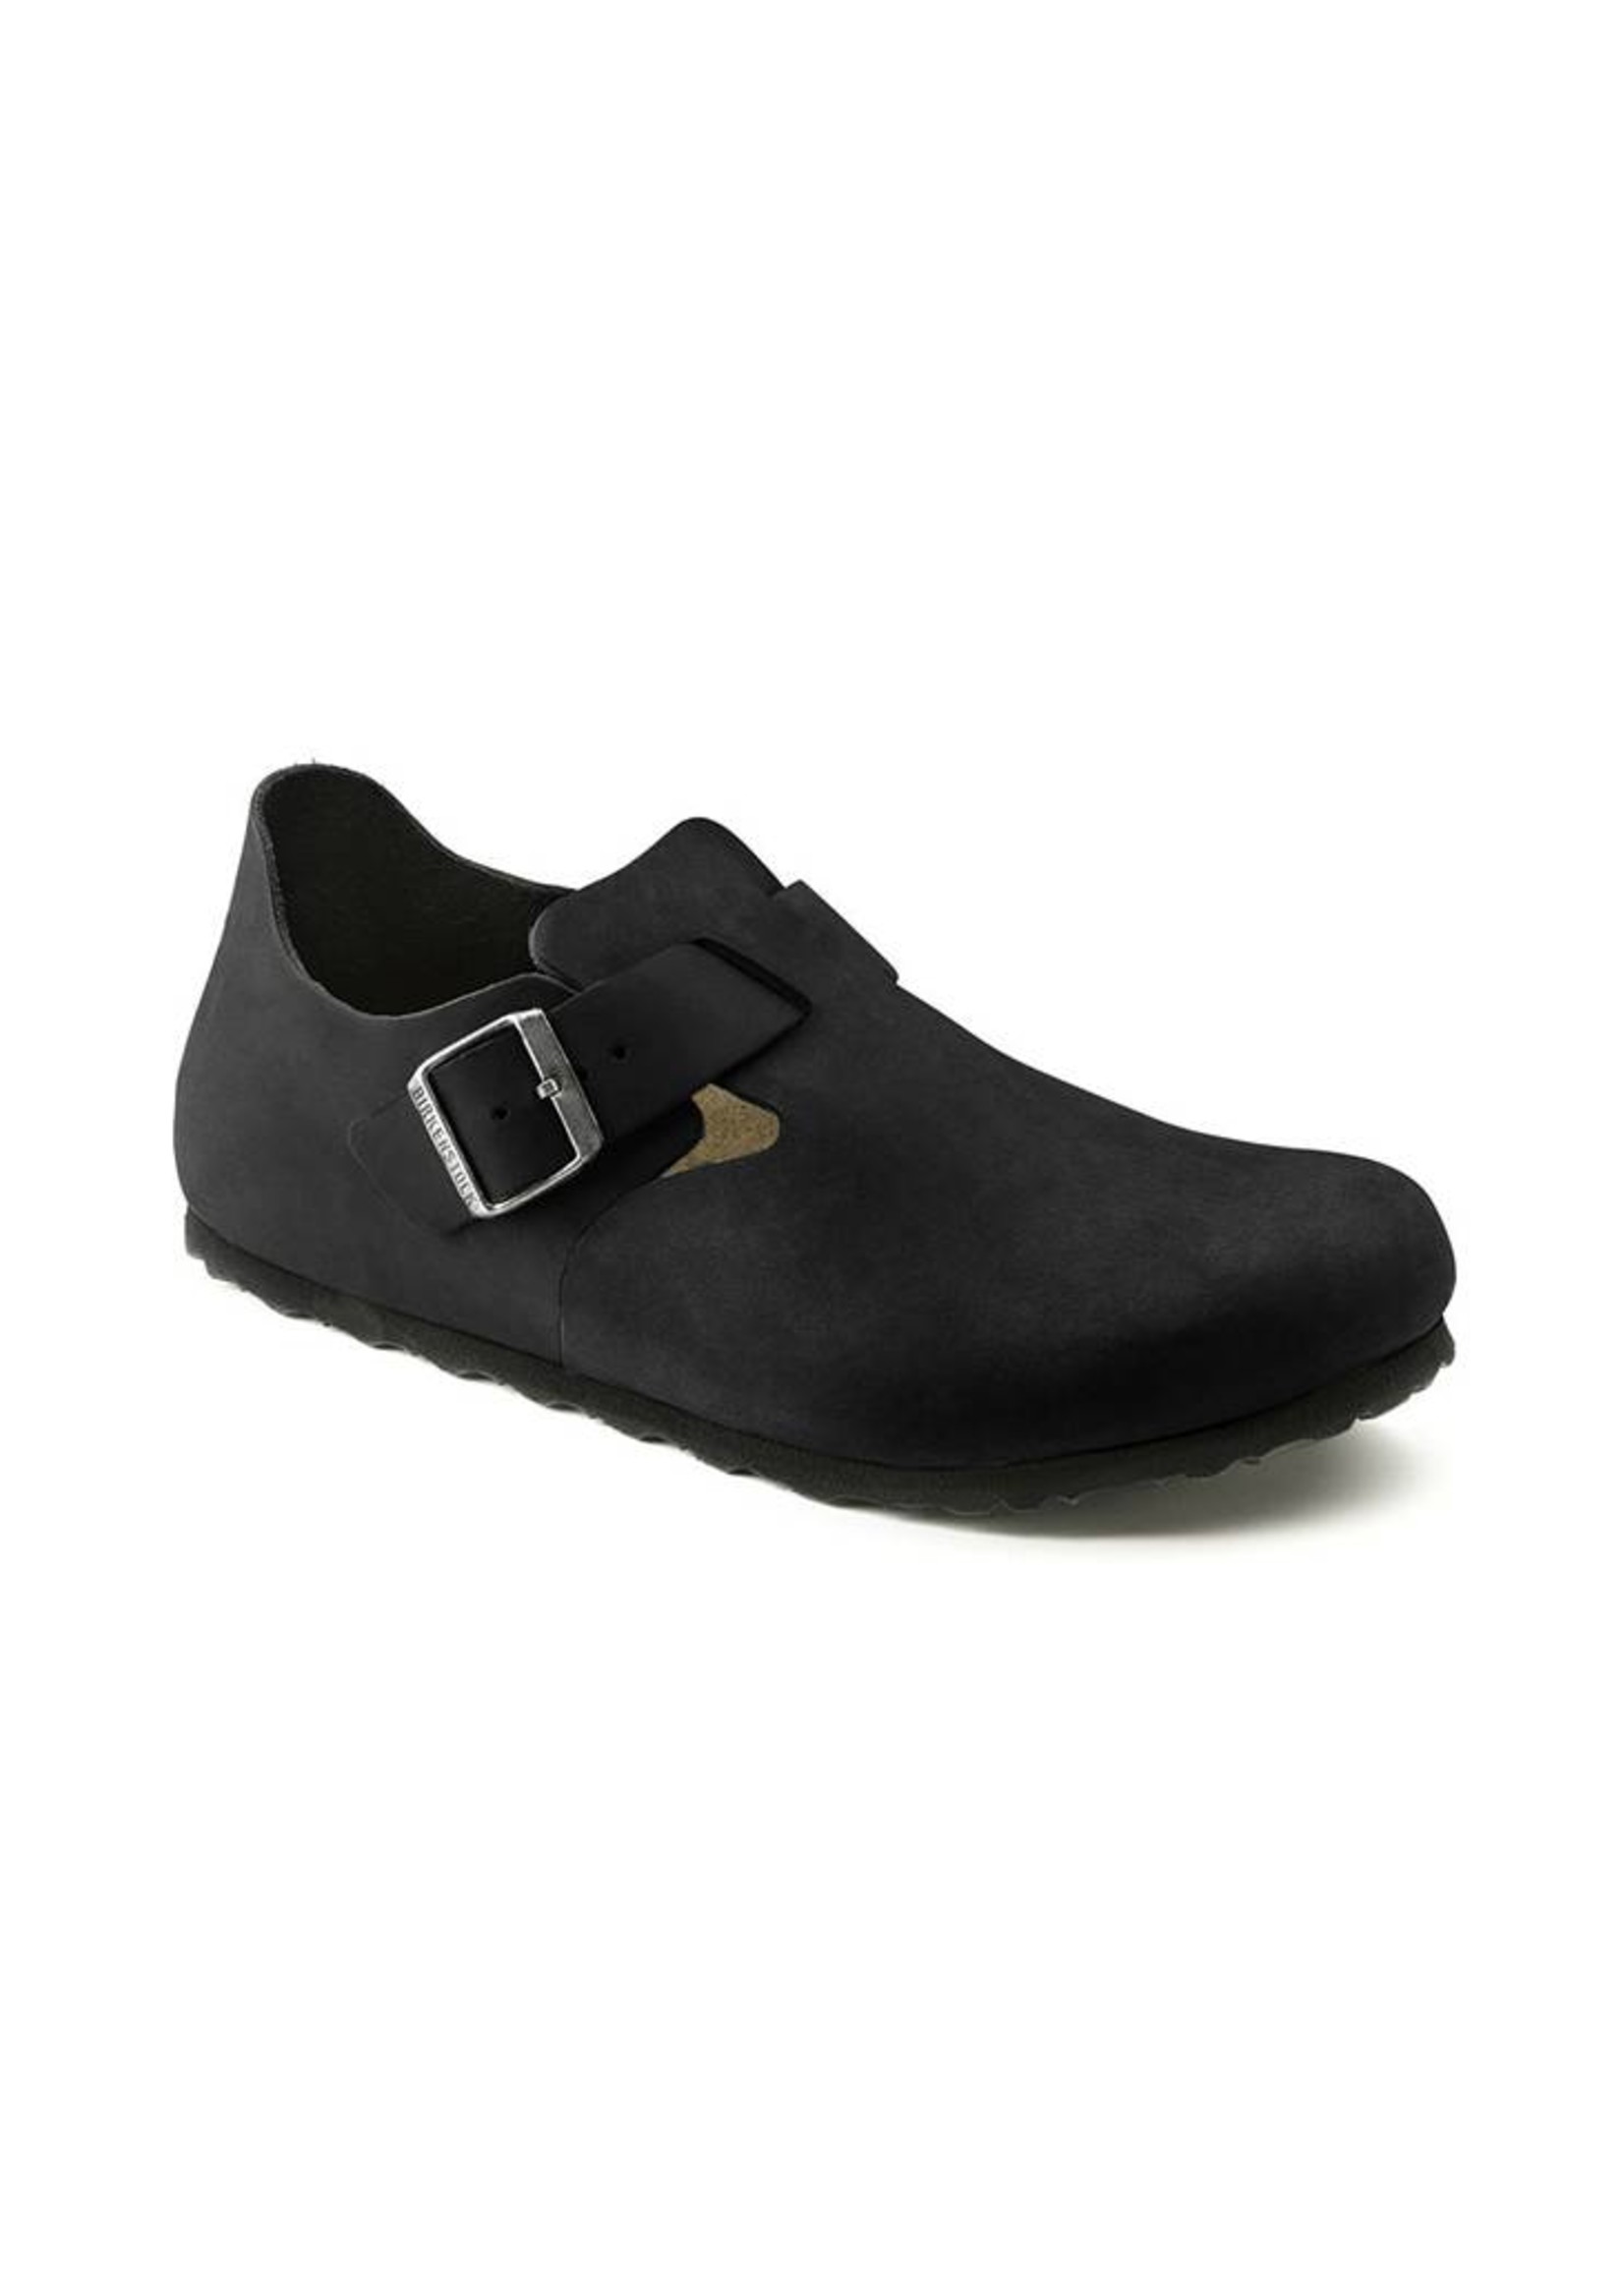 Birkenstock London - Natural Oiled Leather in Black (Classic footbed - Suede Lined)